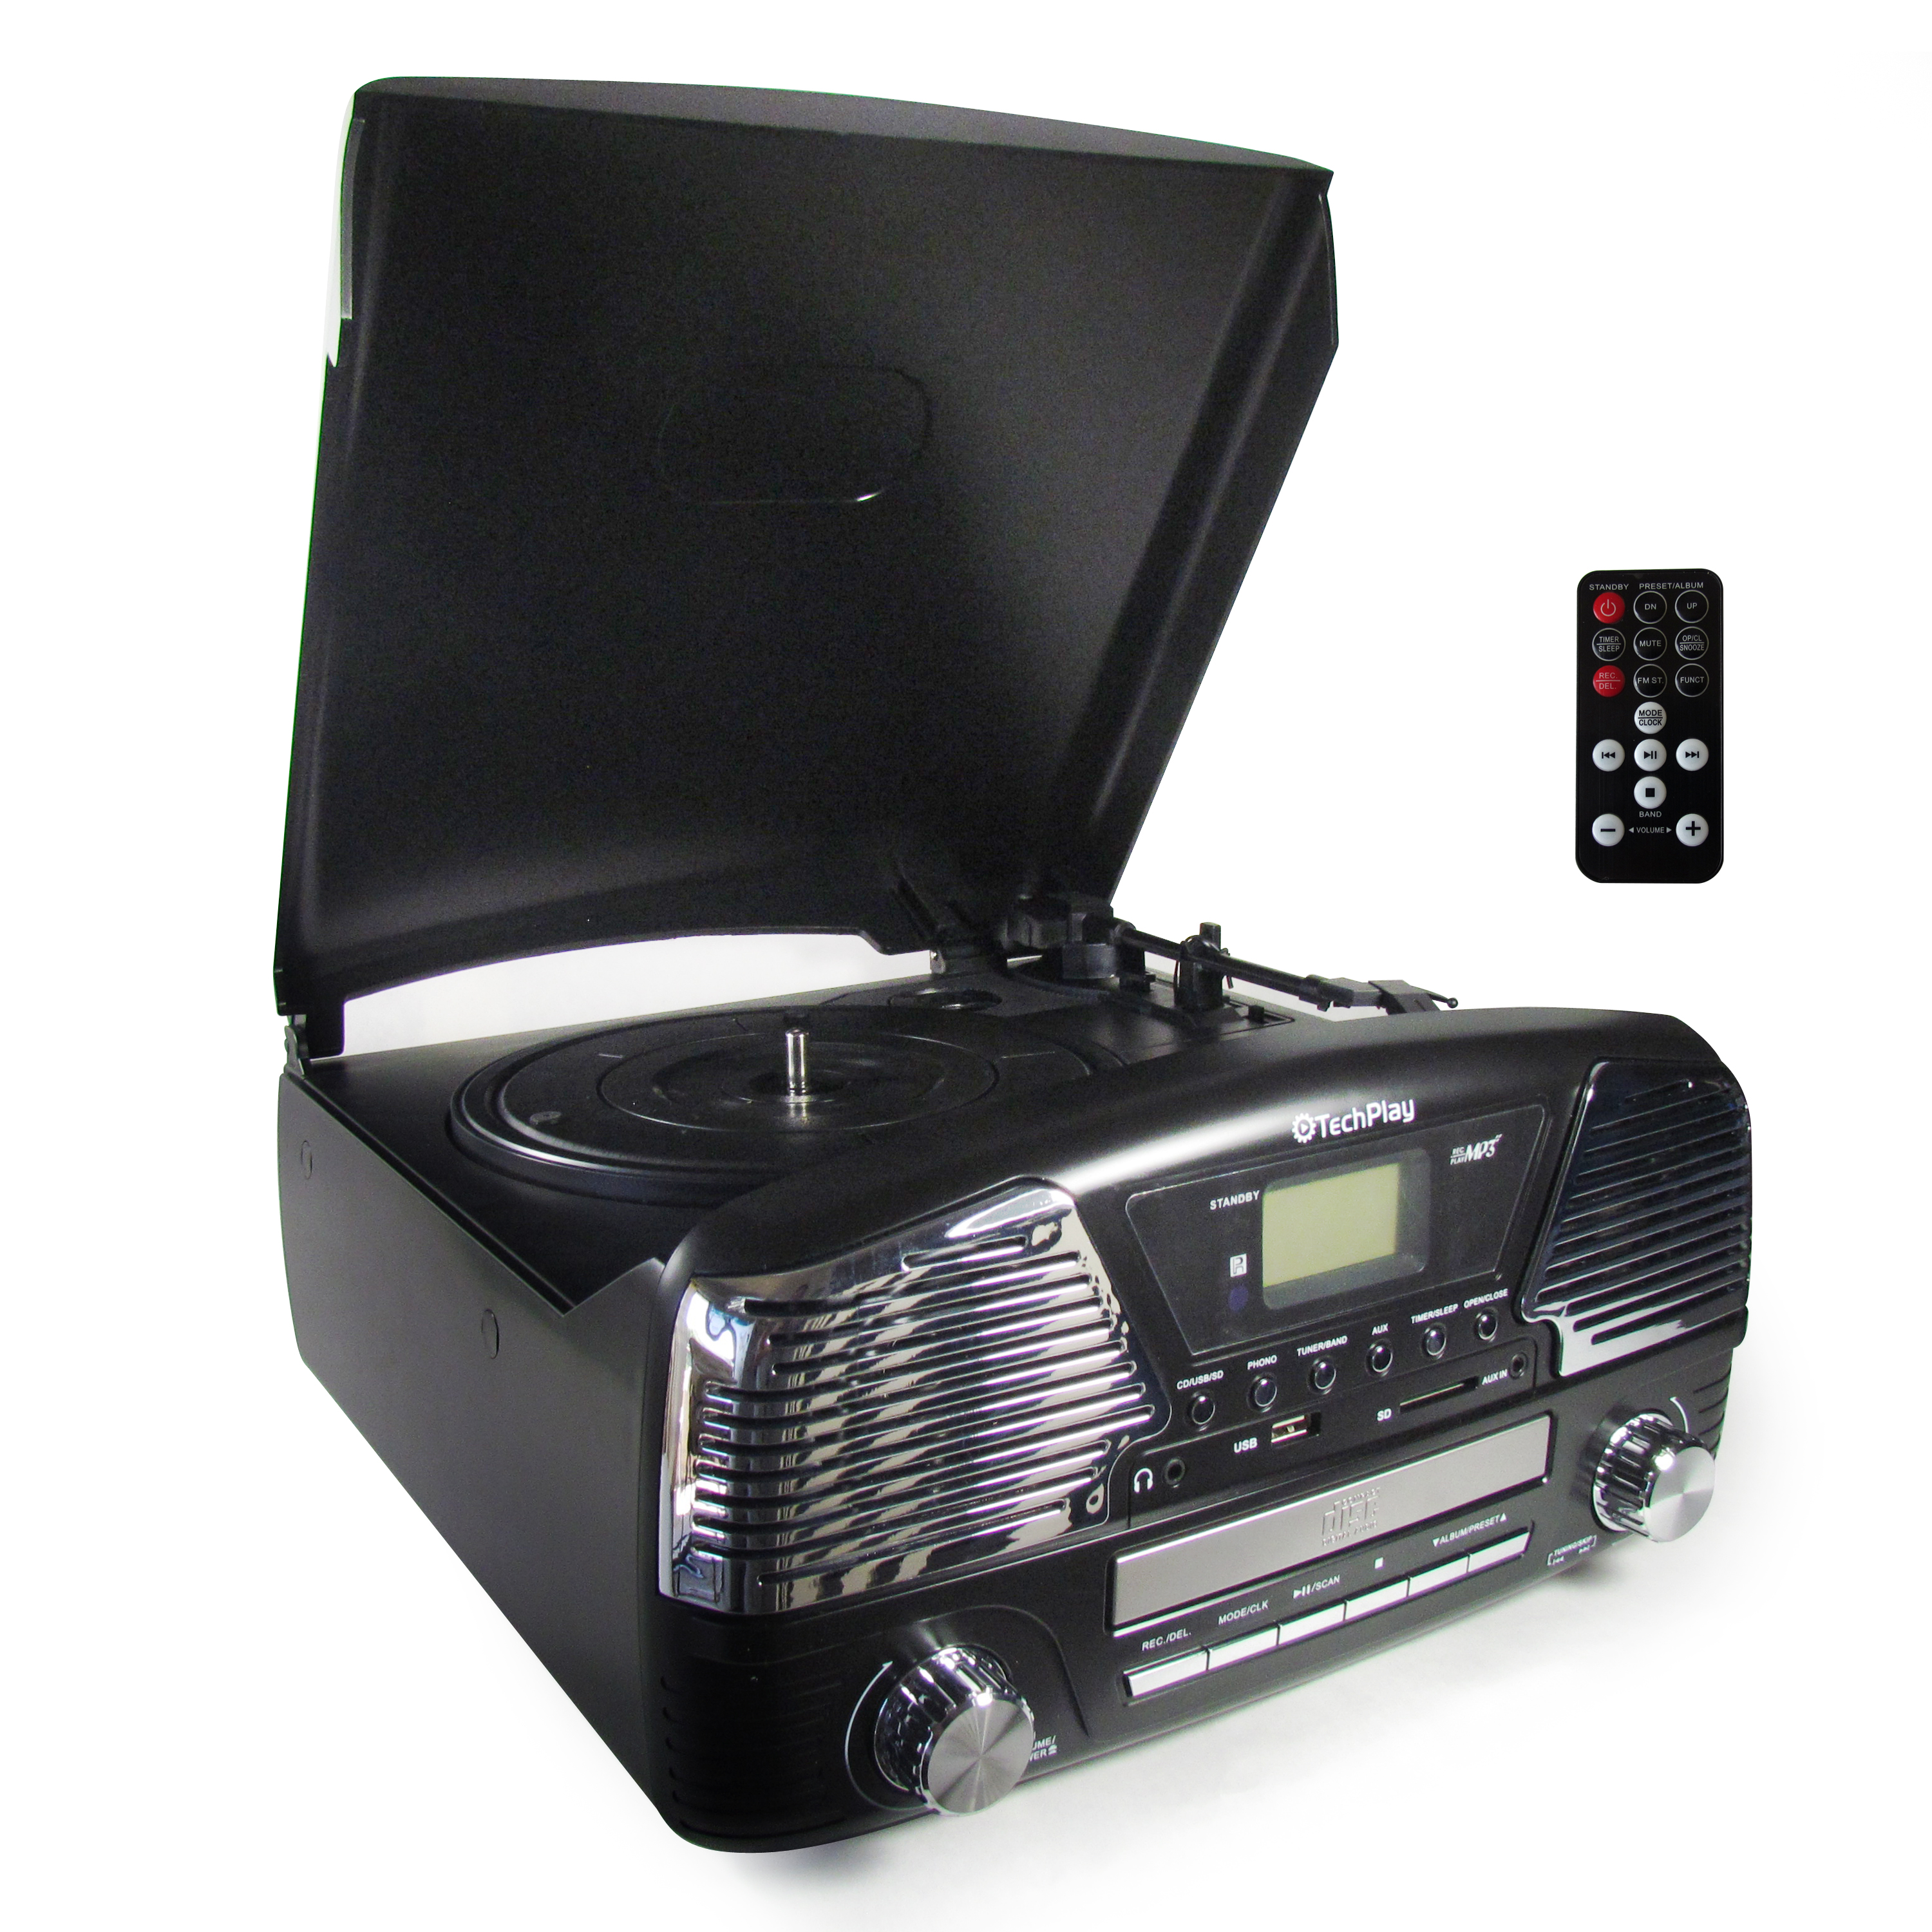 TechPlay ODC35 BLK, 3 Spead turntable, programmable MP3 CD playe